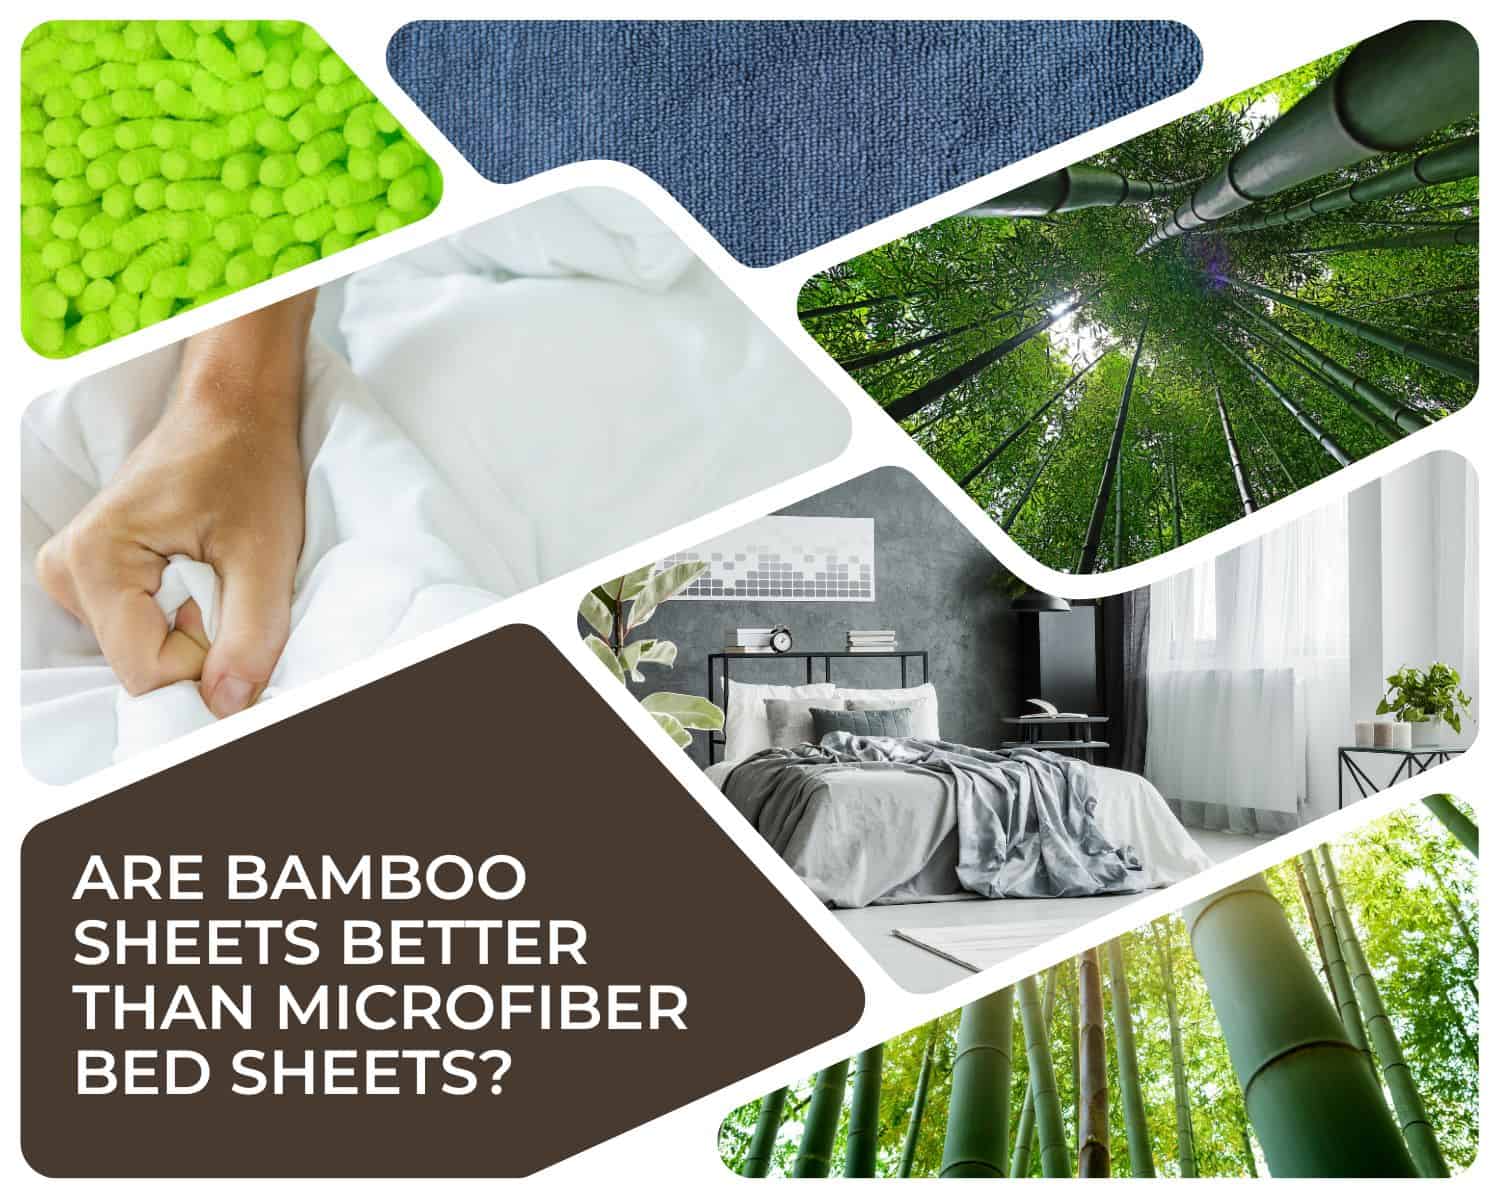 Are Bamboo Sheets BETTER than Microfiber Bed Sheets Let's Find Out